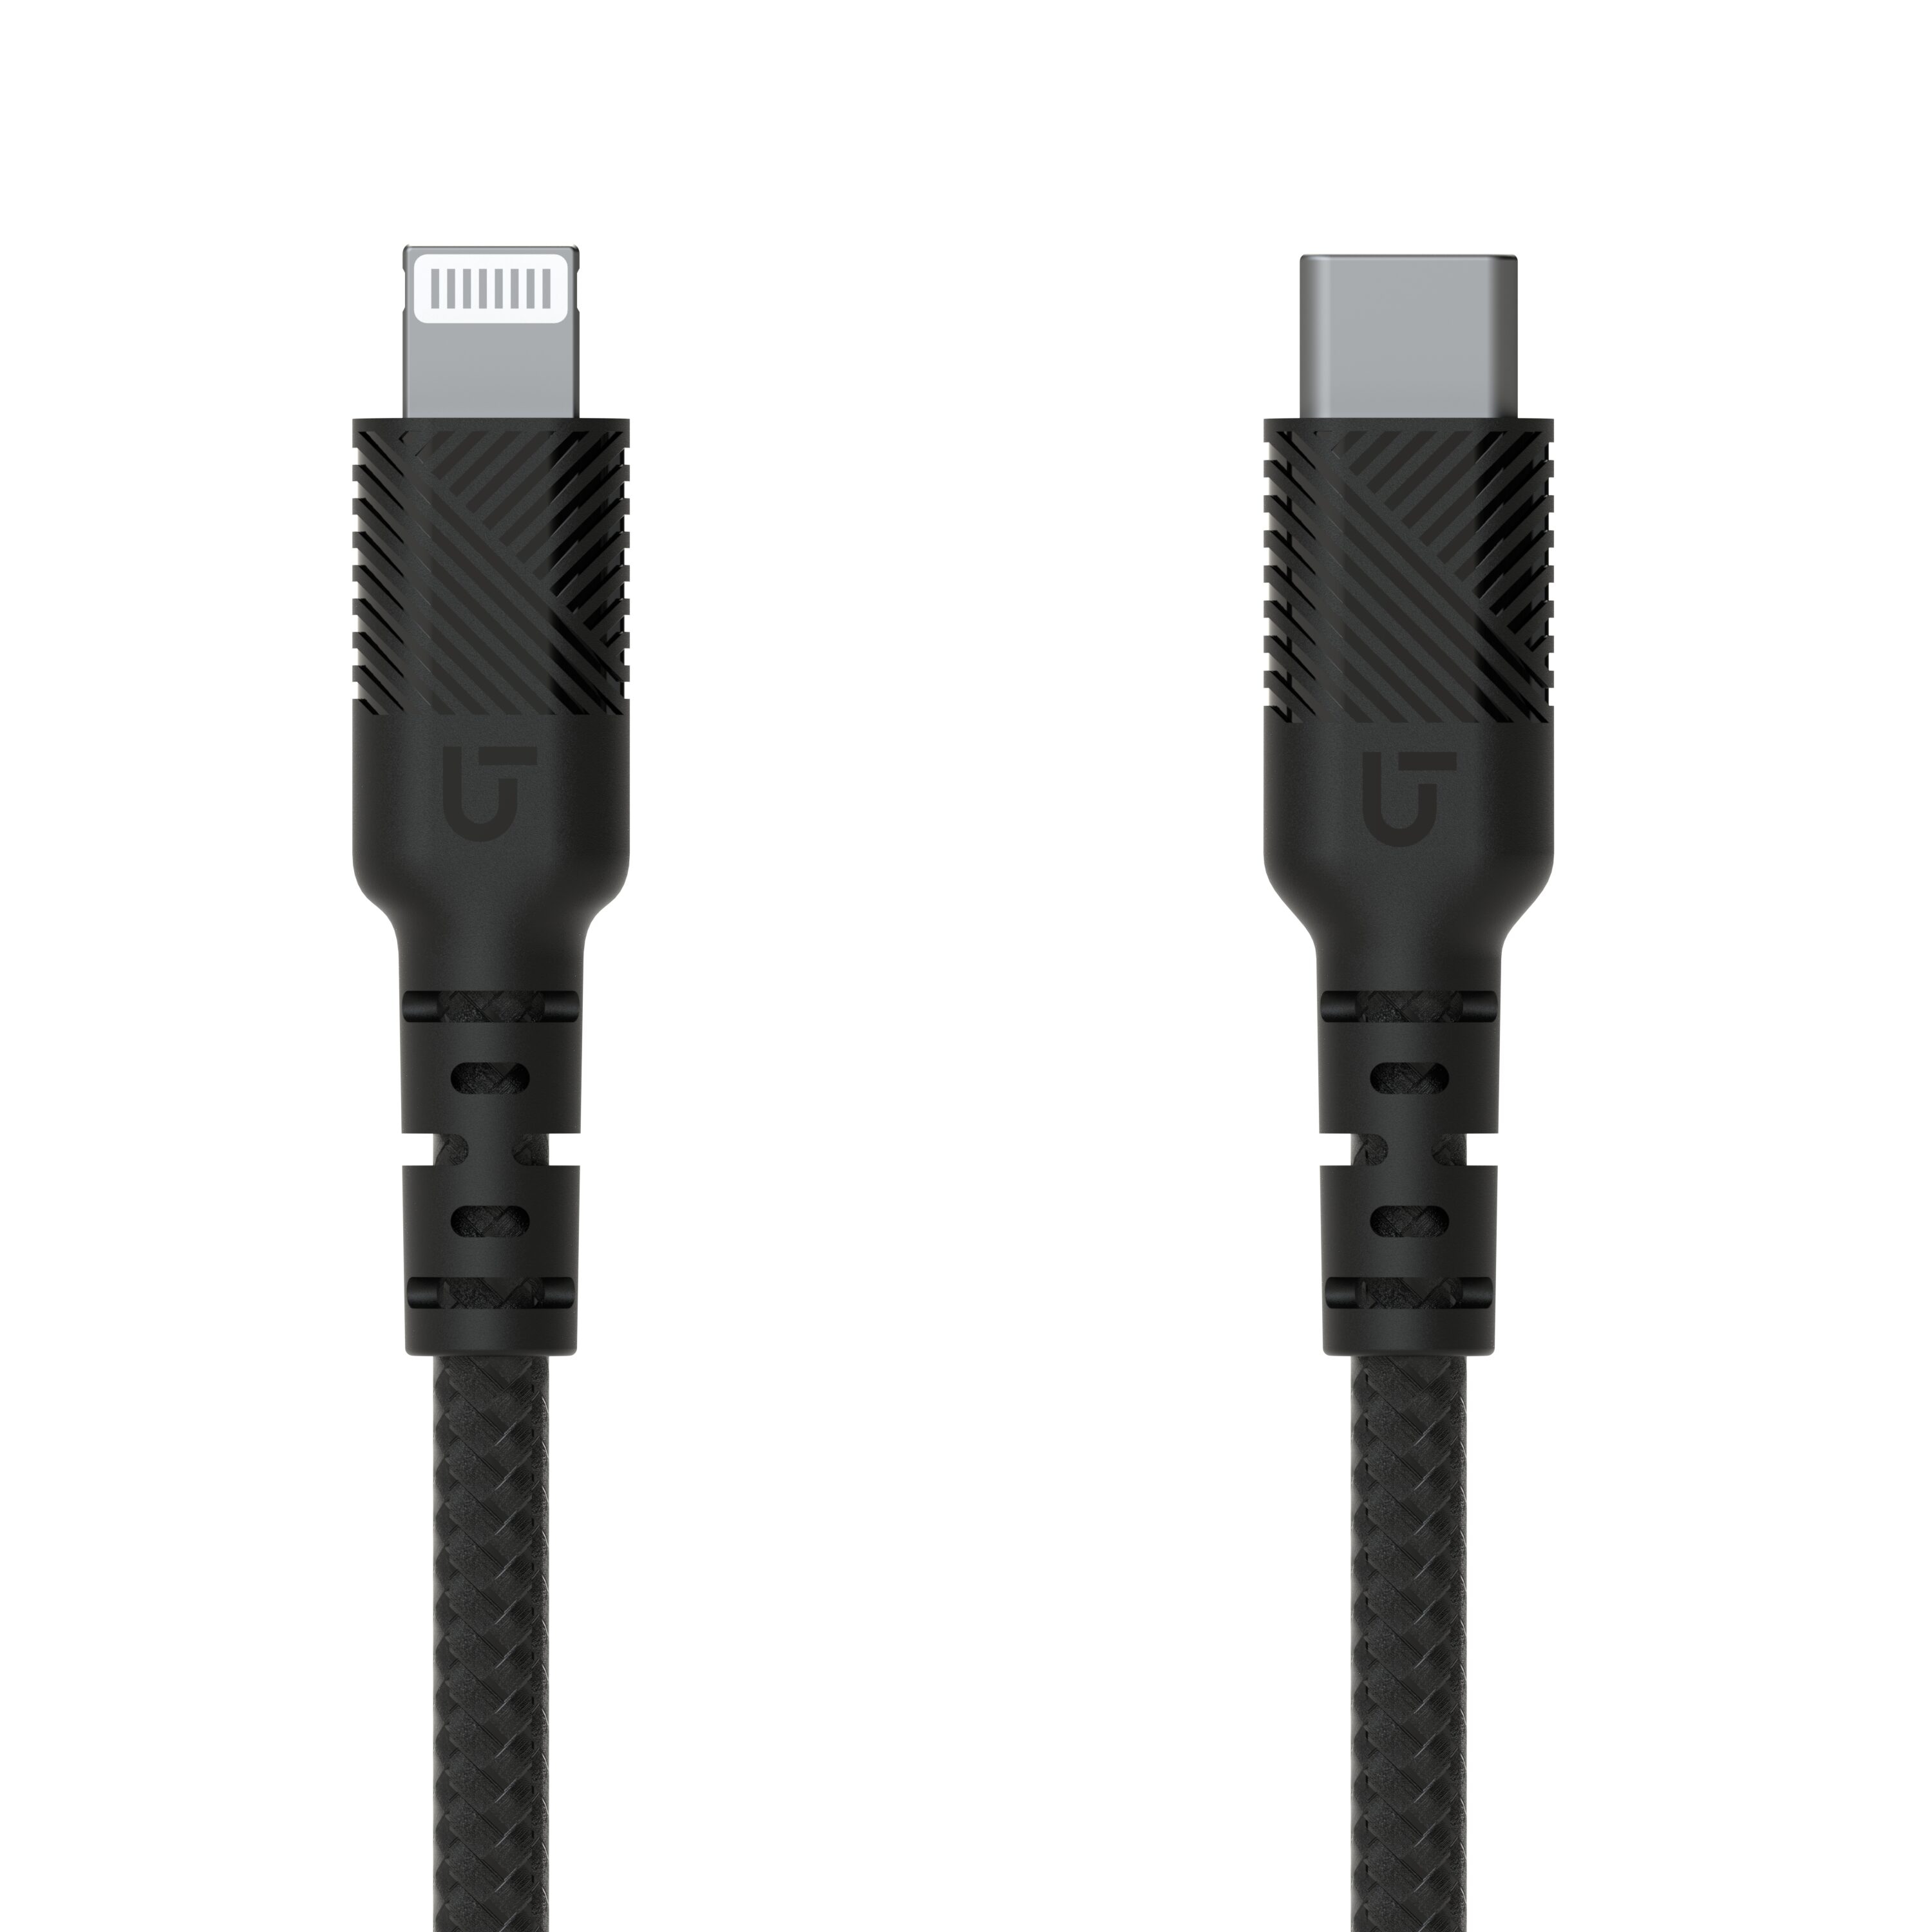 USB-C to Lightning USB Cables at